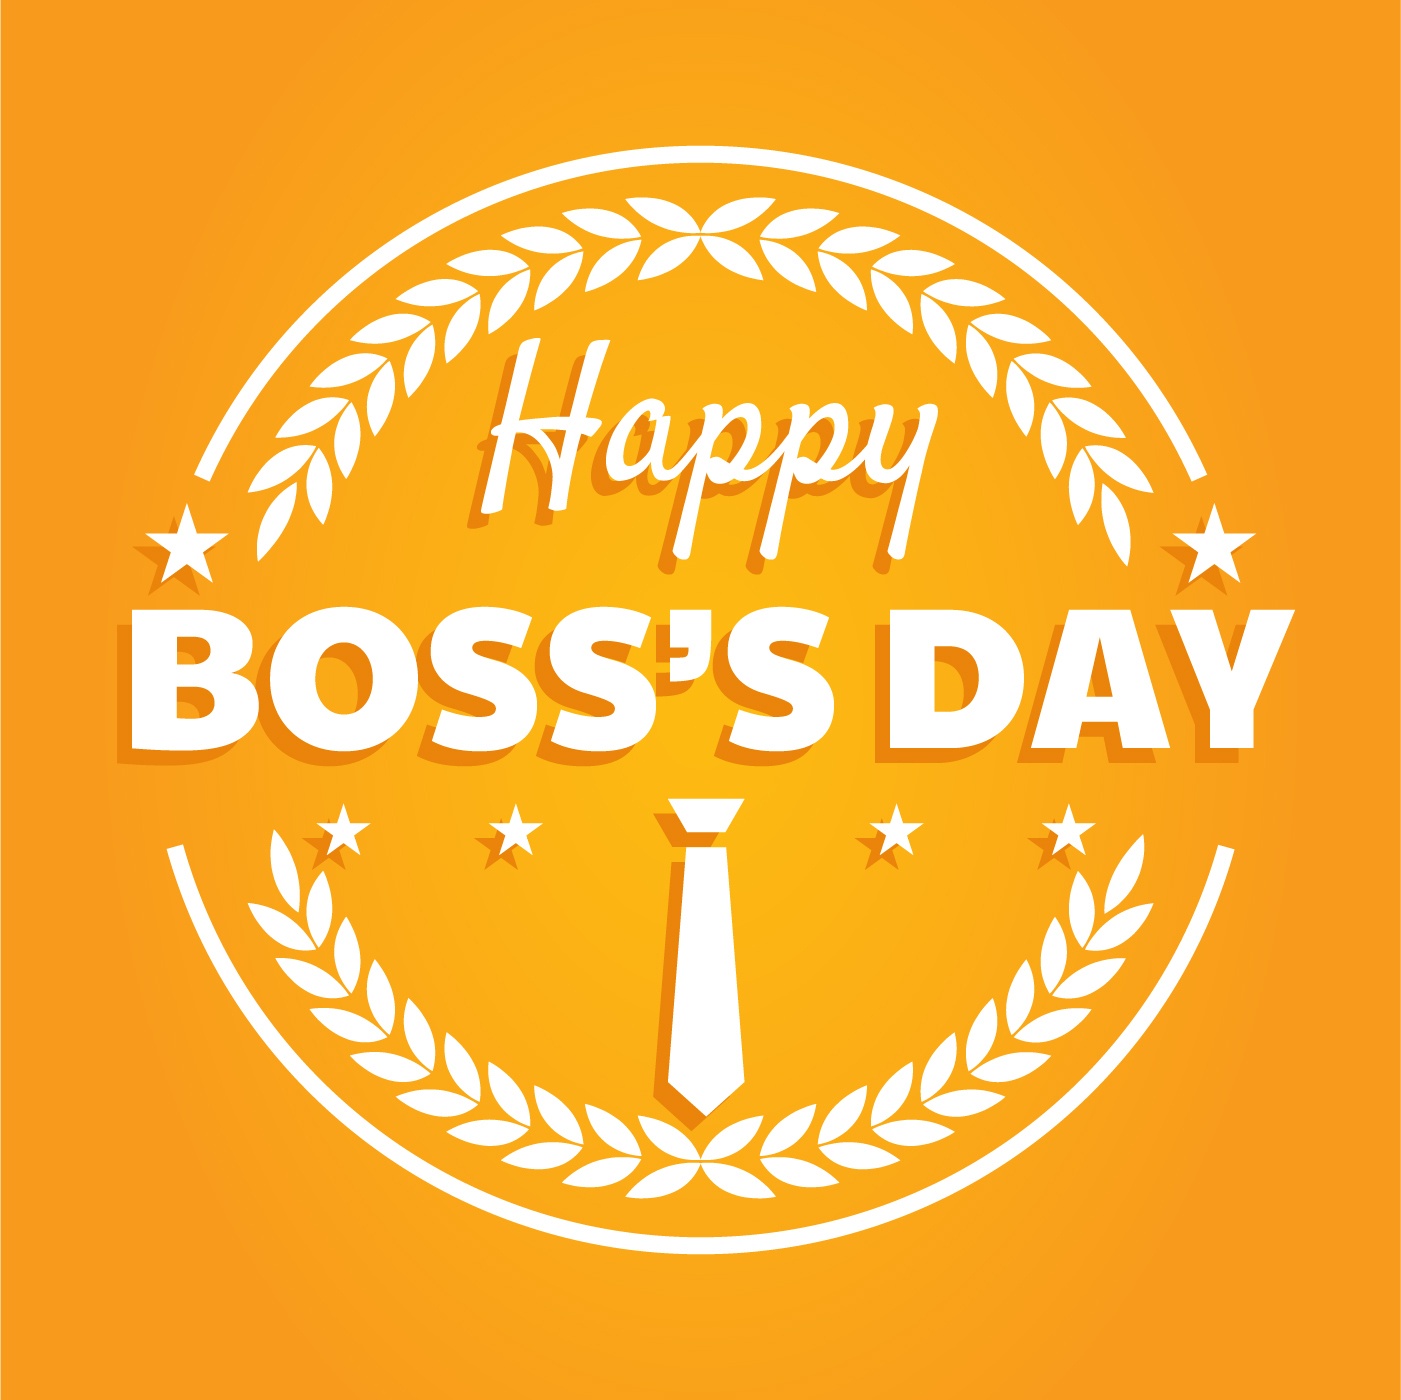 Free Printable Boss Day Cards